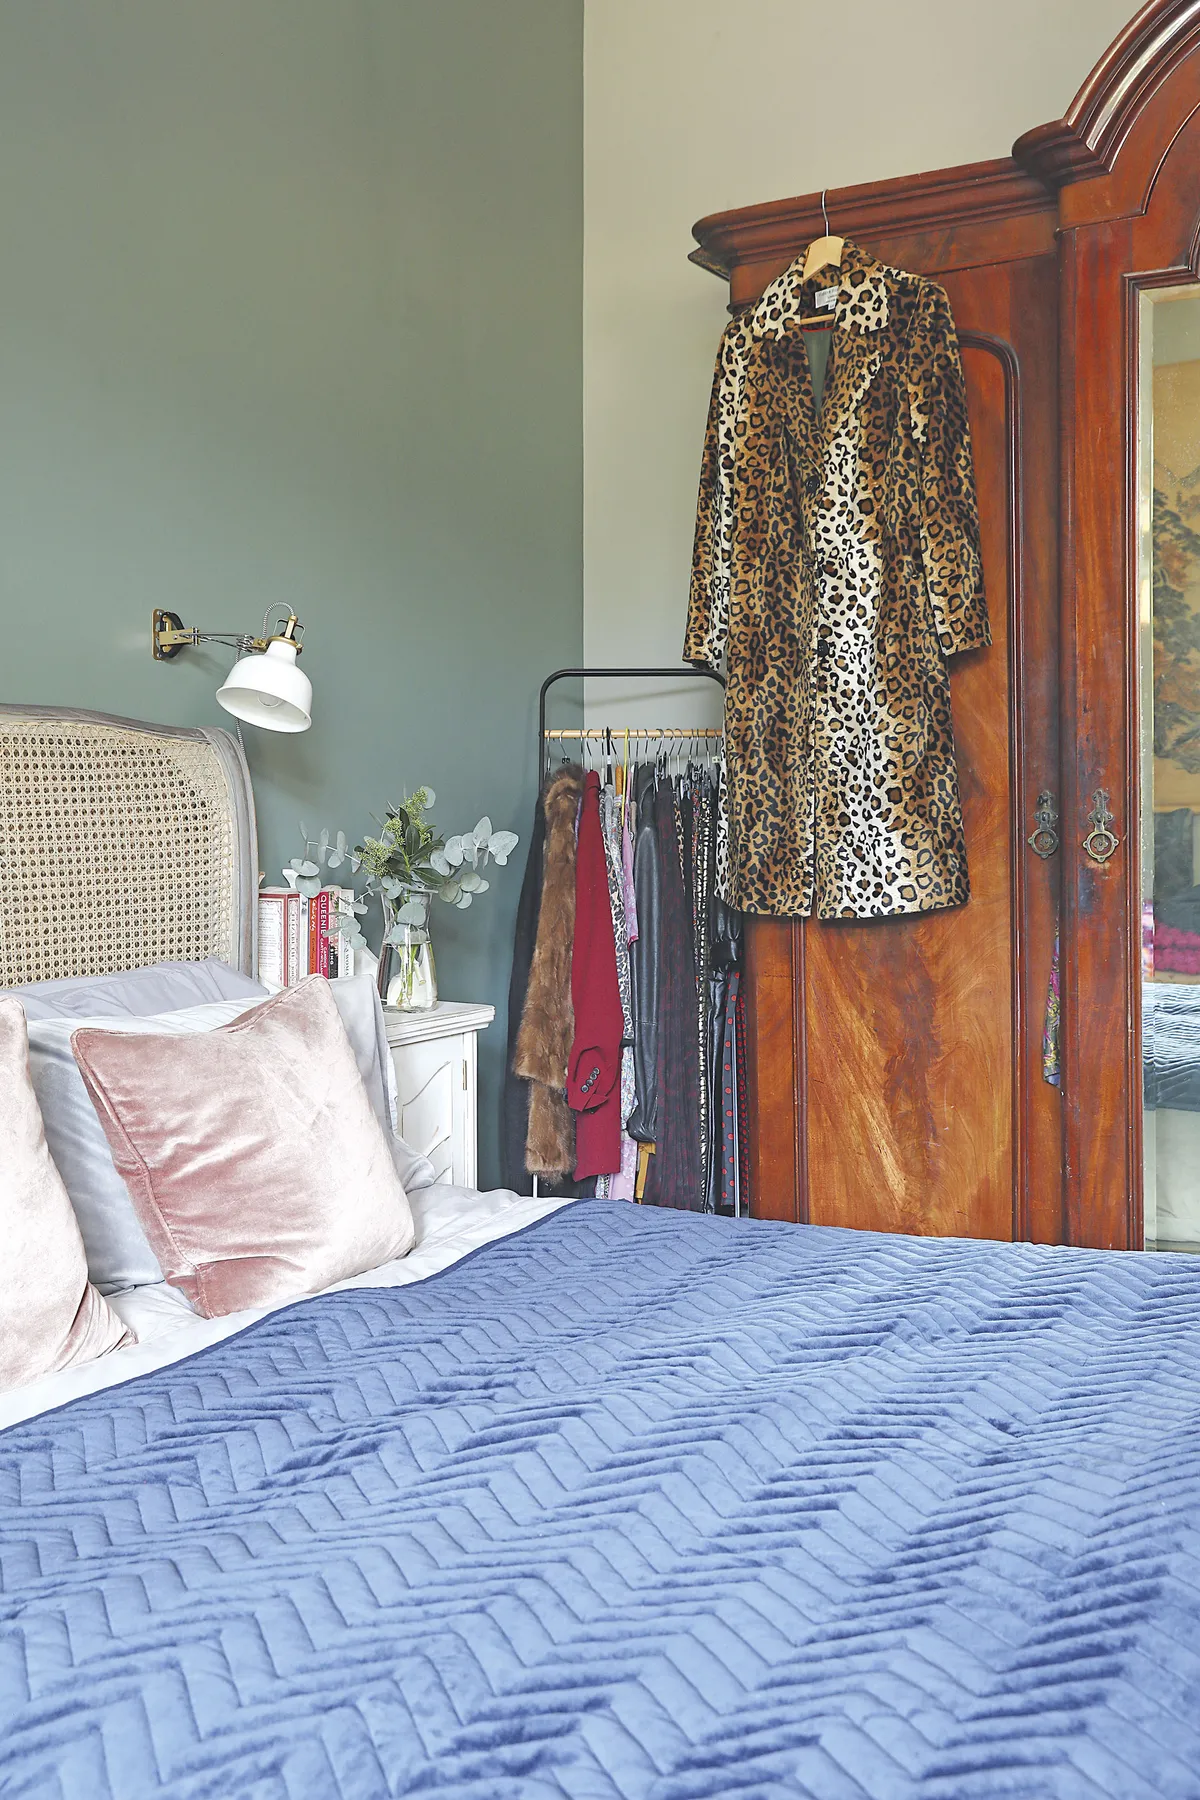 ‘I love the rattan French vintage feel of the bed, which I stock in my shop, Rose & Lee Interiors. The vintage bedside tables were sourced at an antiques market and the blue throw is by Broste Copenhagen’